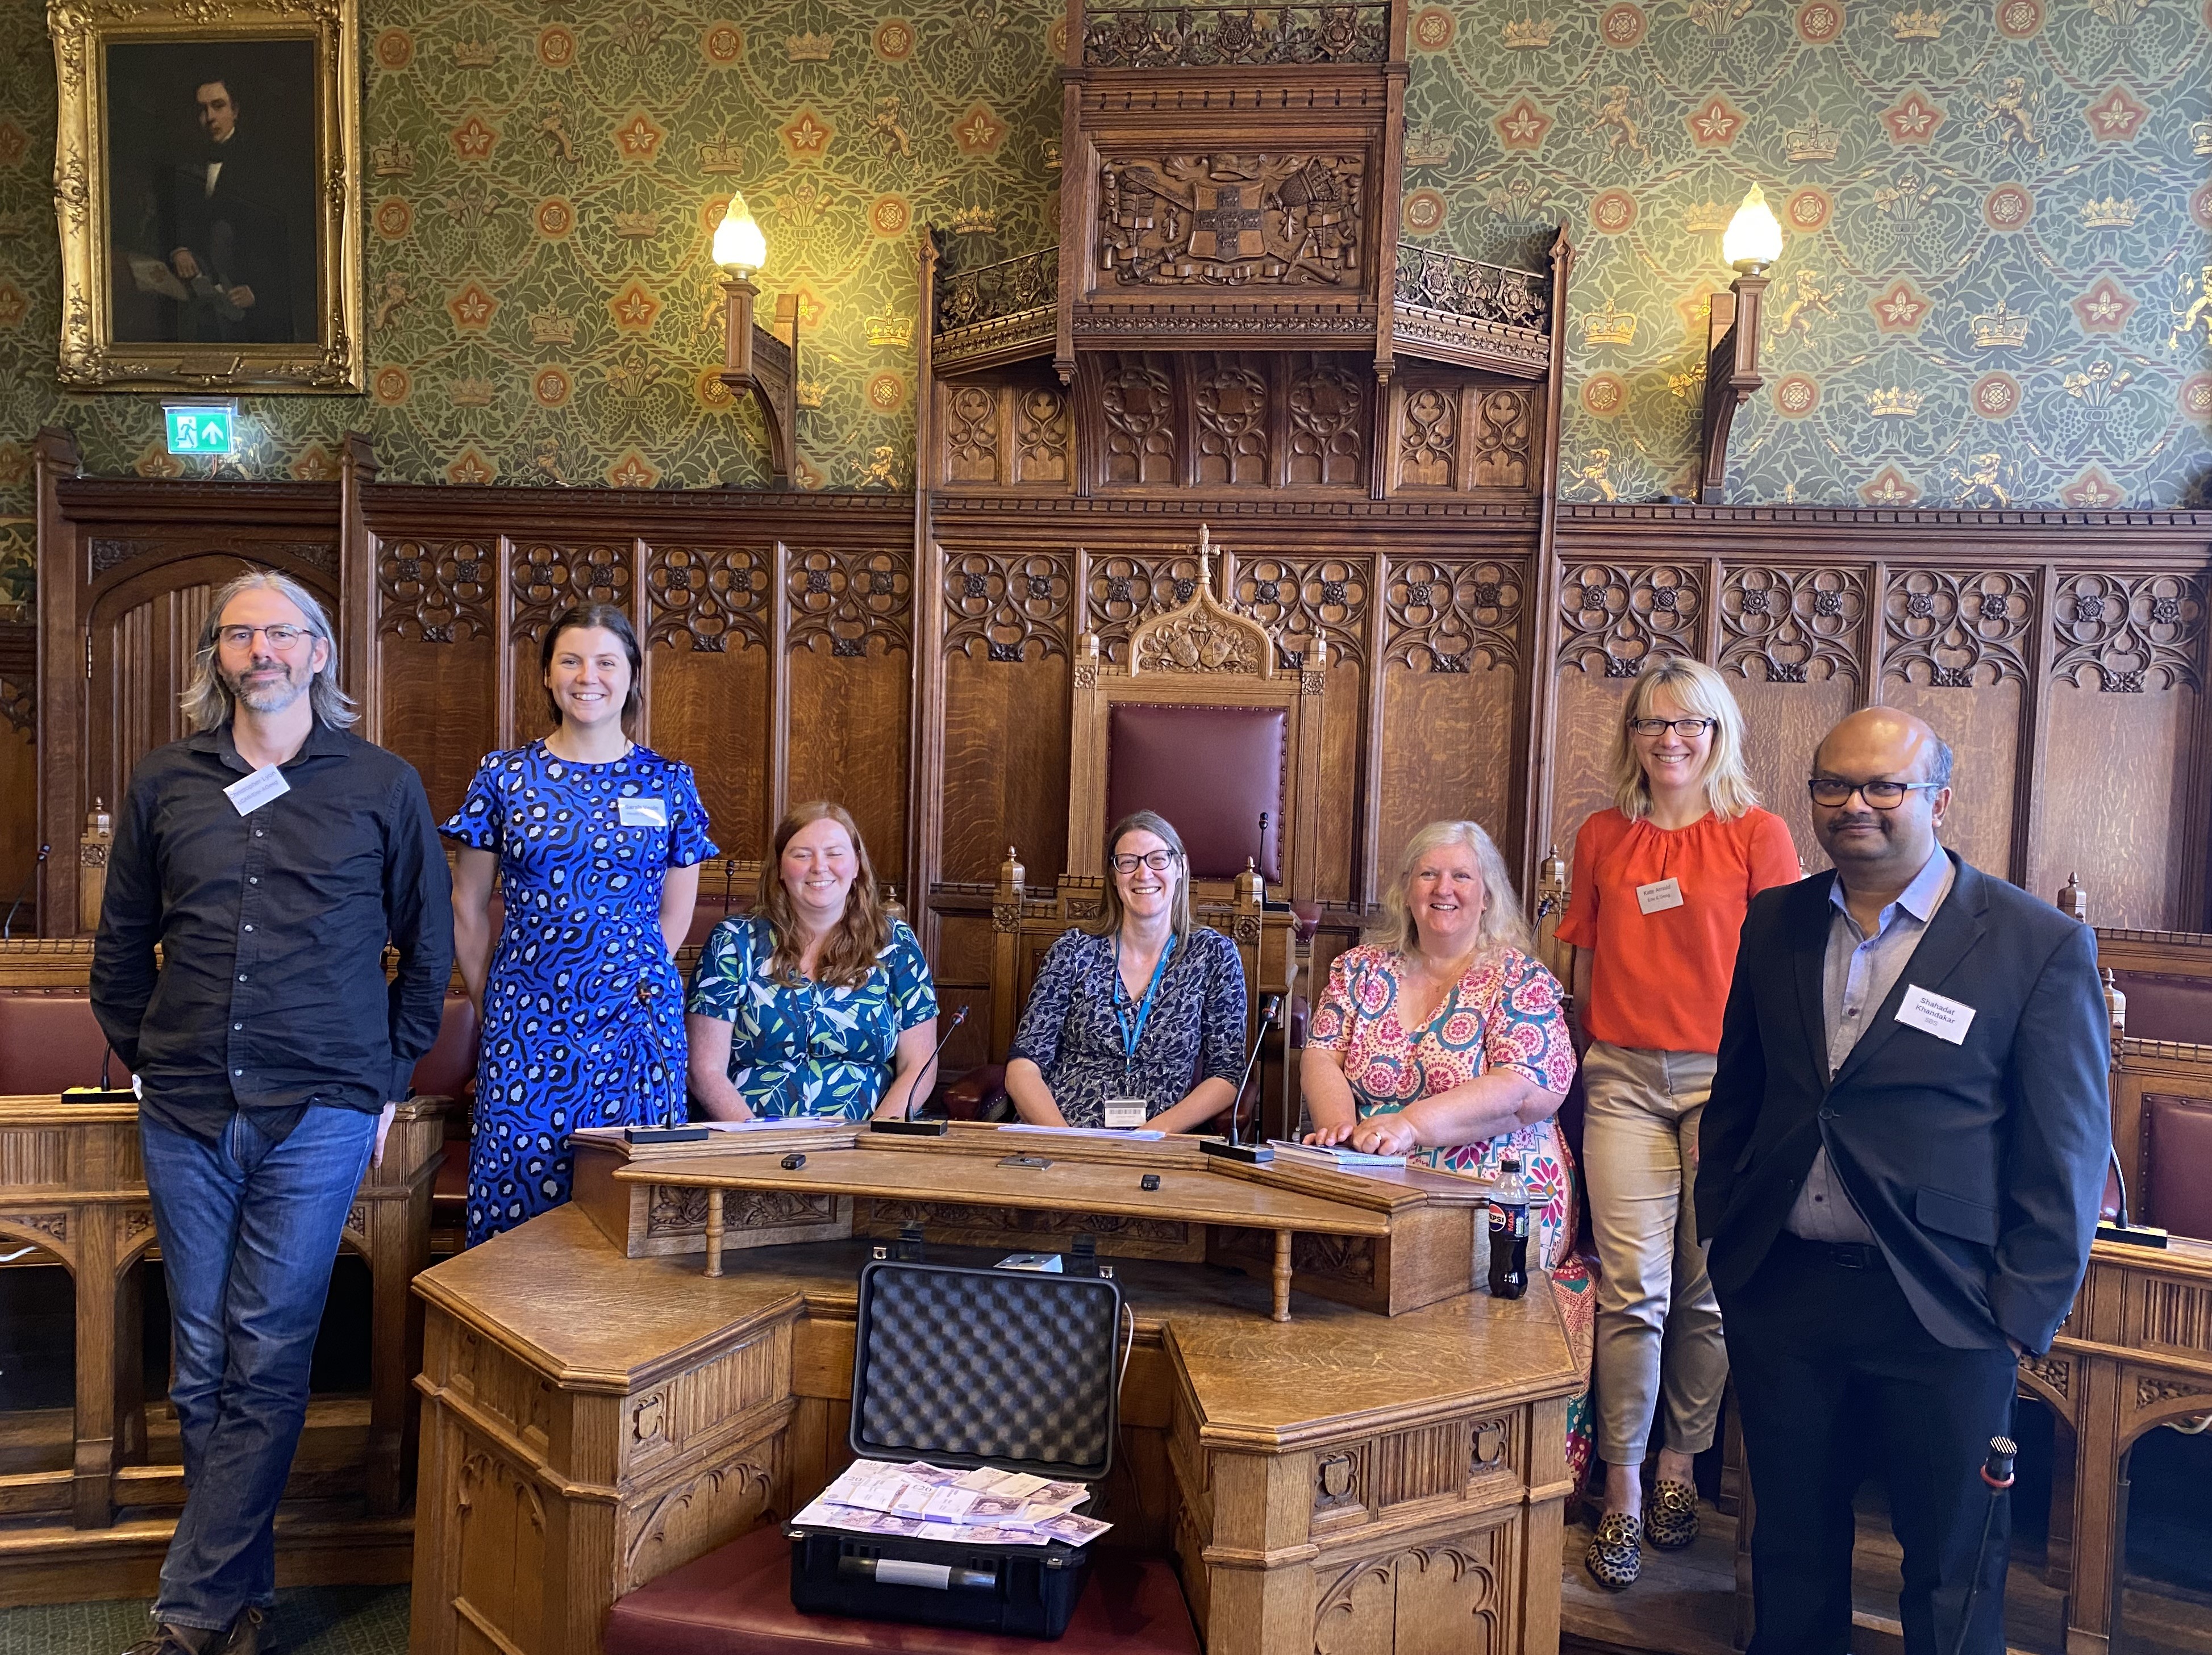 Dragons' Den Team 3 award winners pictured with Dragons in The Guildhall Council Chamber